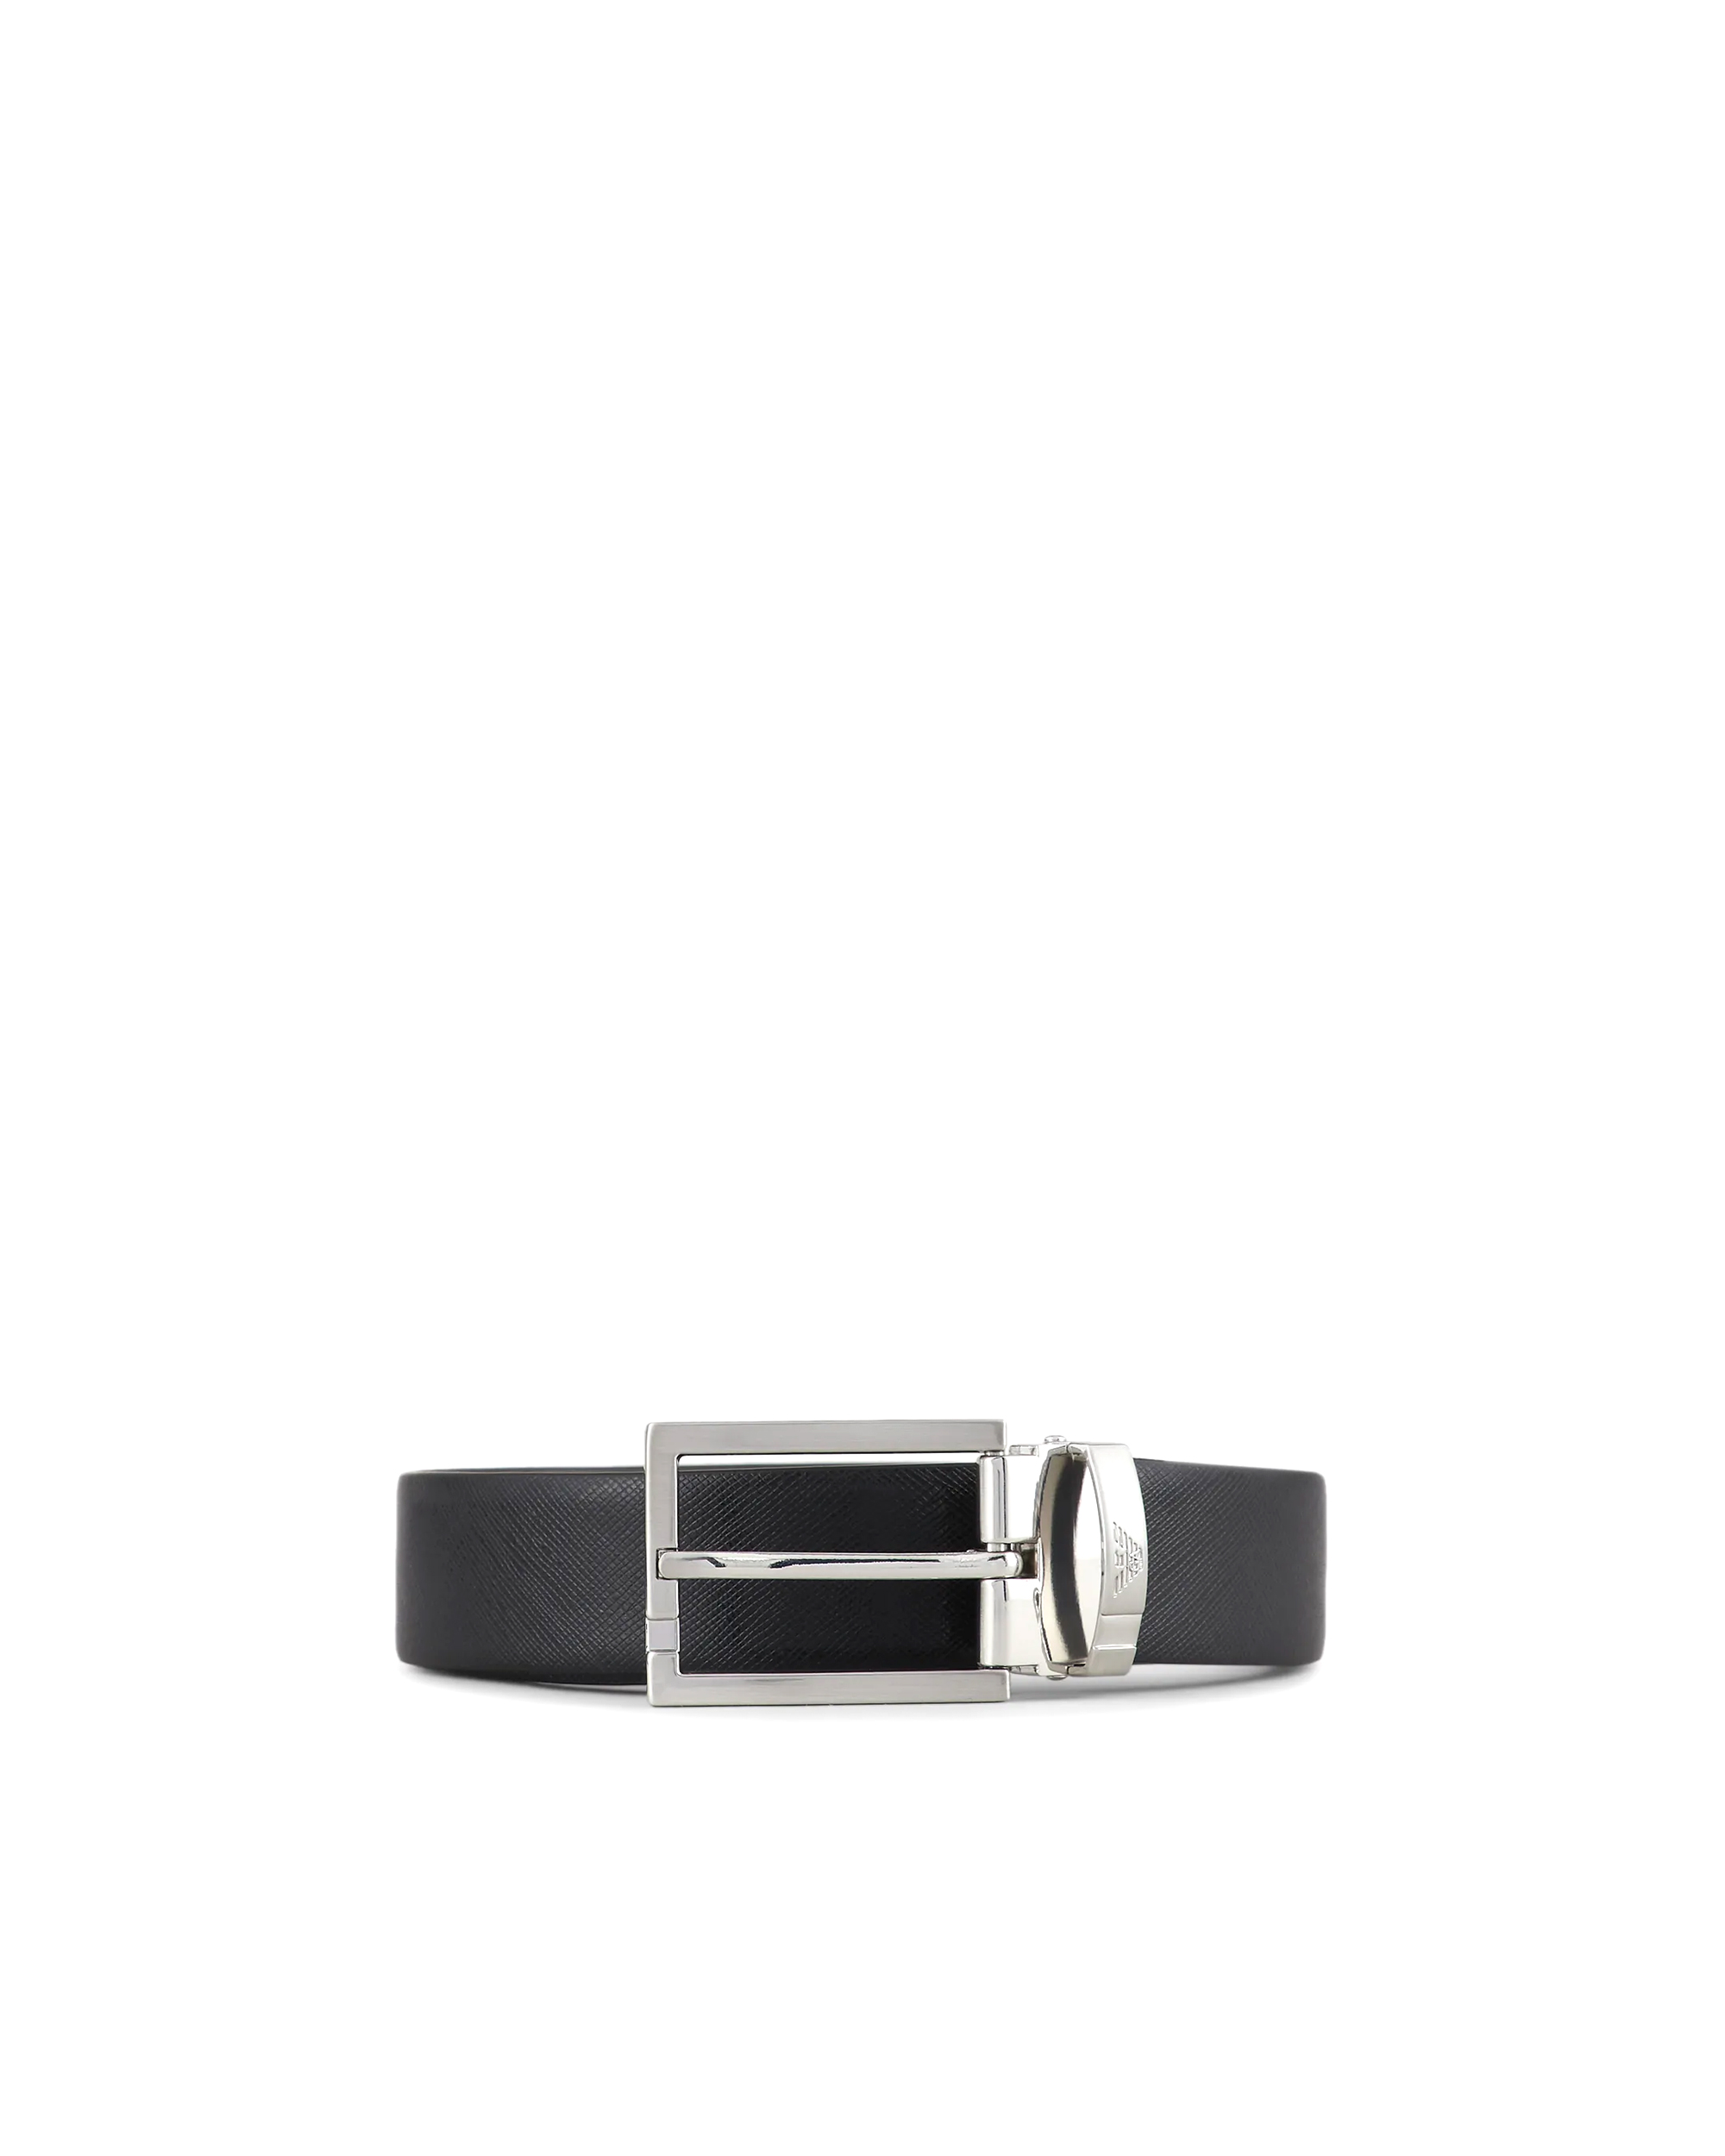 Emporio Armani Gift Box With Reversible Belt In Saffiano Leather And Interchangeable Buckle In 81519